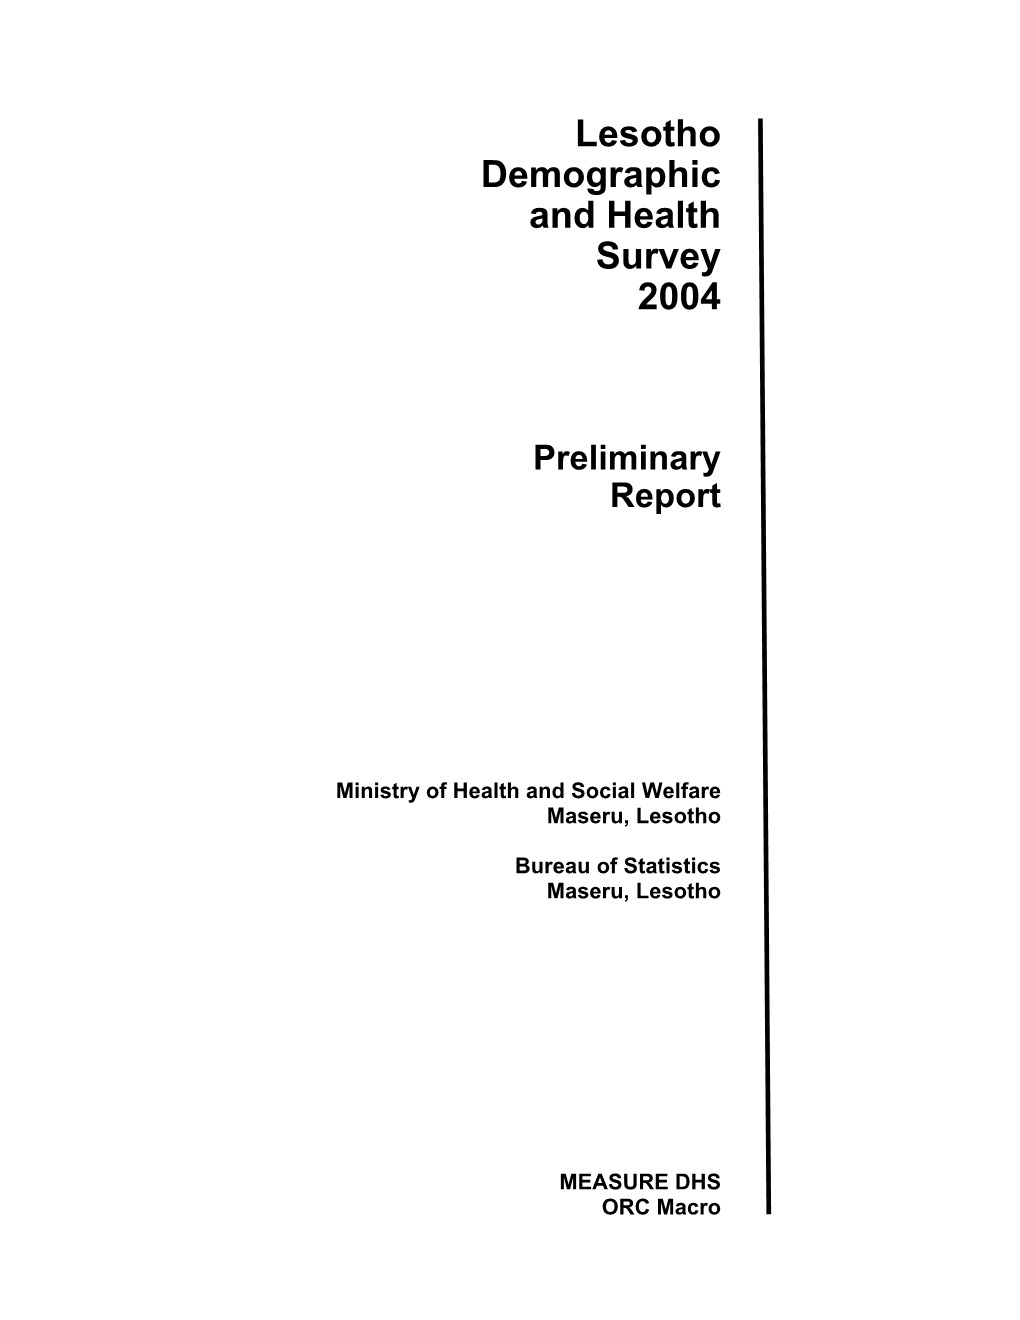 Lesotho Demographic and Health Survey 2004